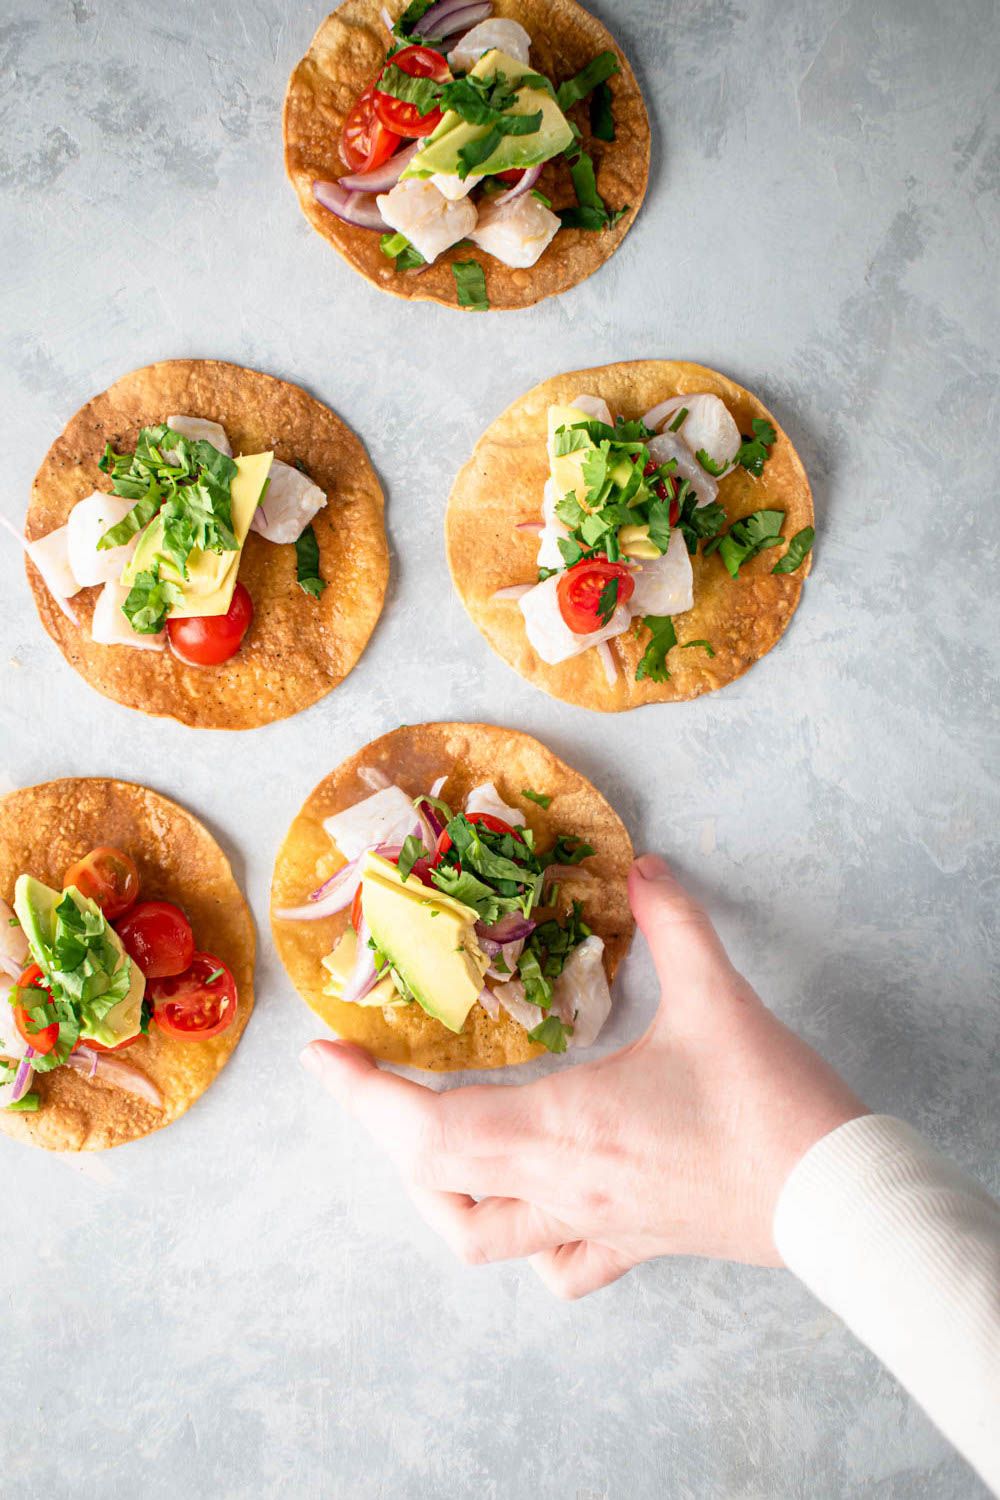 Tostadas with fish ceviche on crispy corn tortillas with ceviche, avocado, cilantro, red onion, and tomatoes.